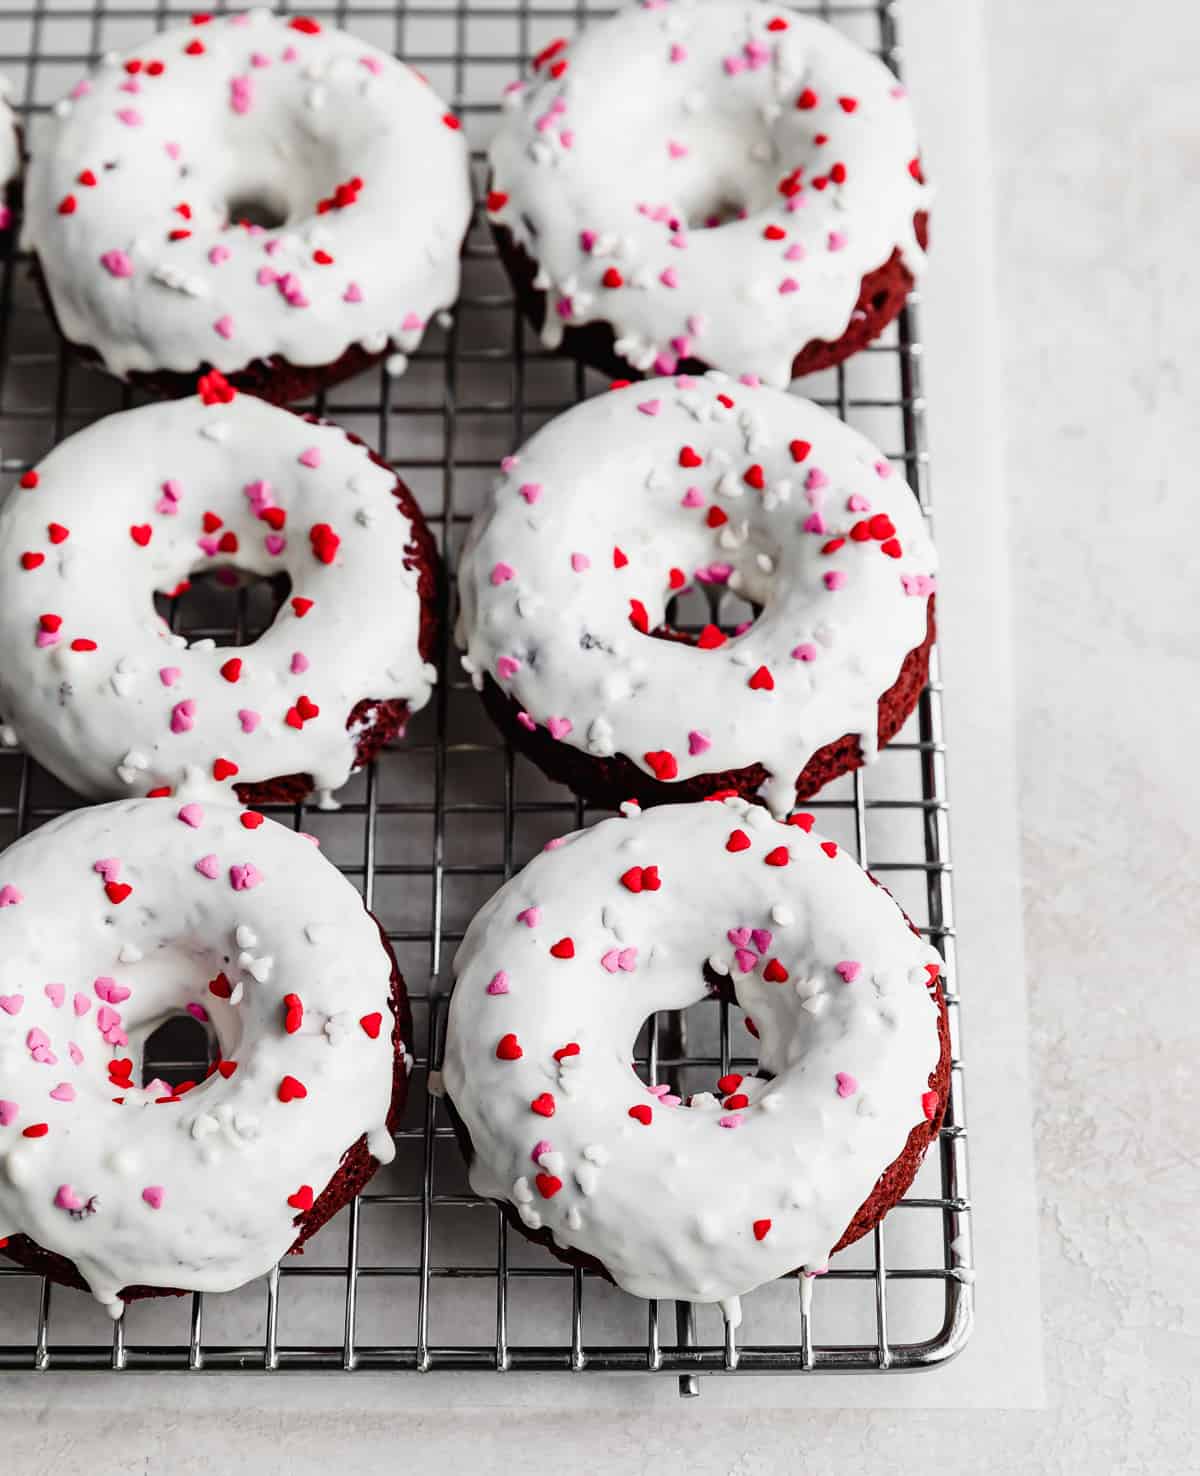 Baked Red Velvet Donuts topped with a white chocolate glaze and heart sprinkles on a wire cooling rack.